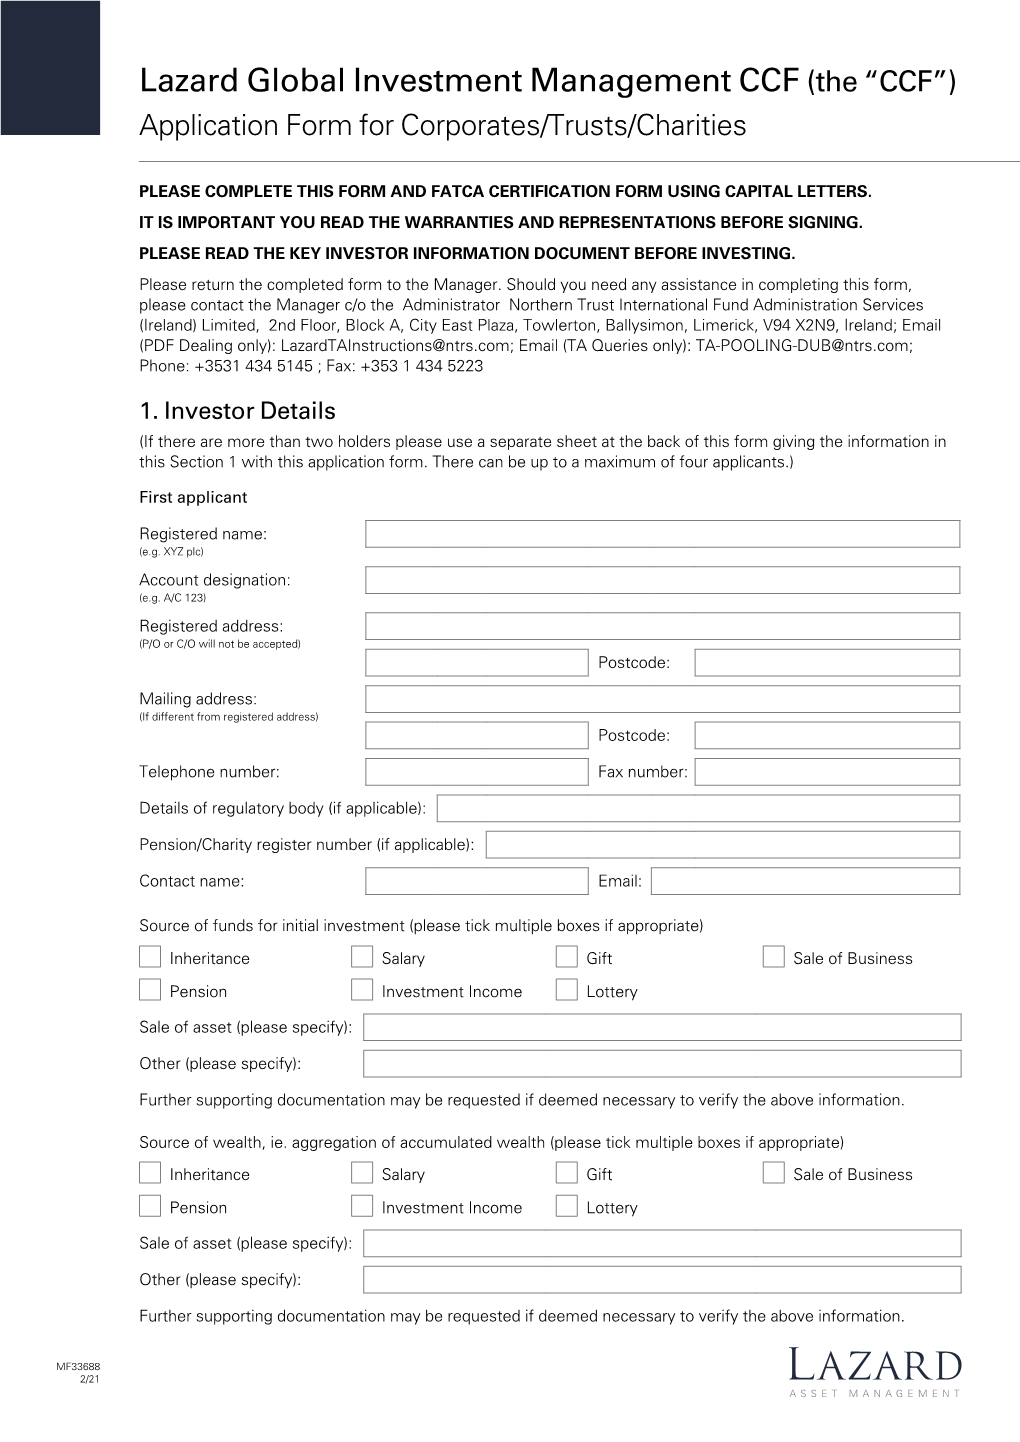 Global Investment Management CCF Application Form for Corporates